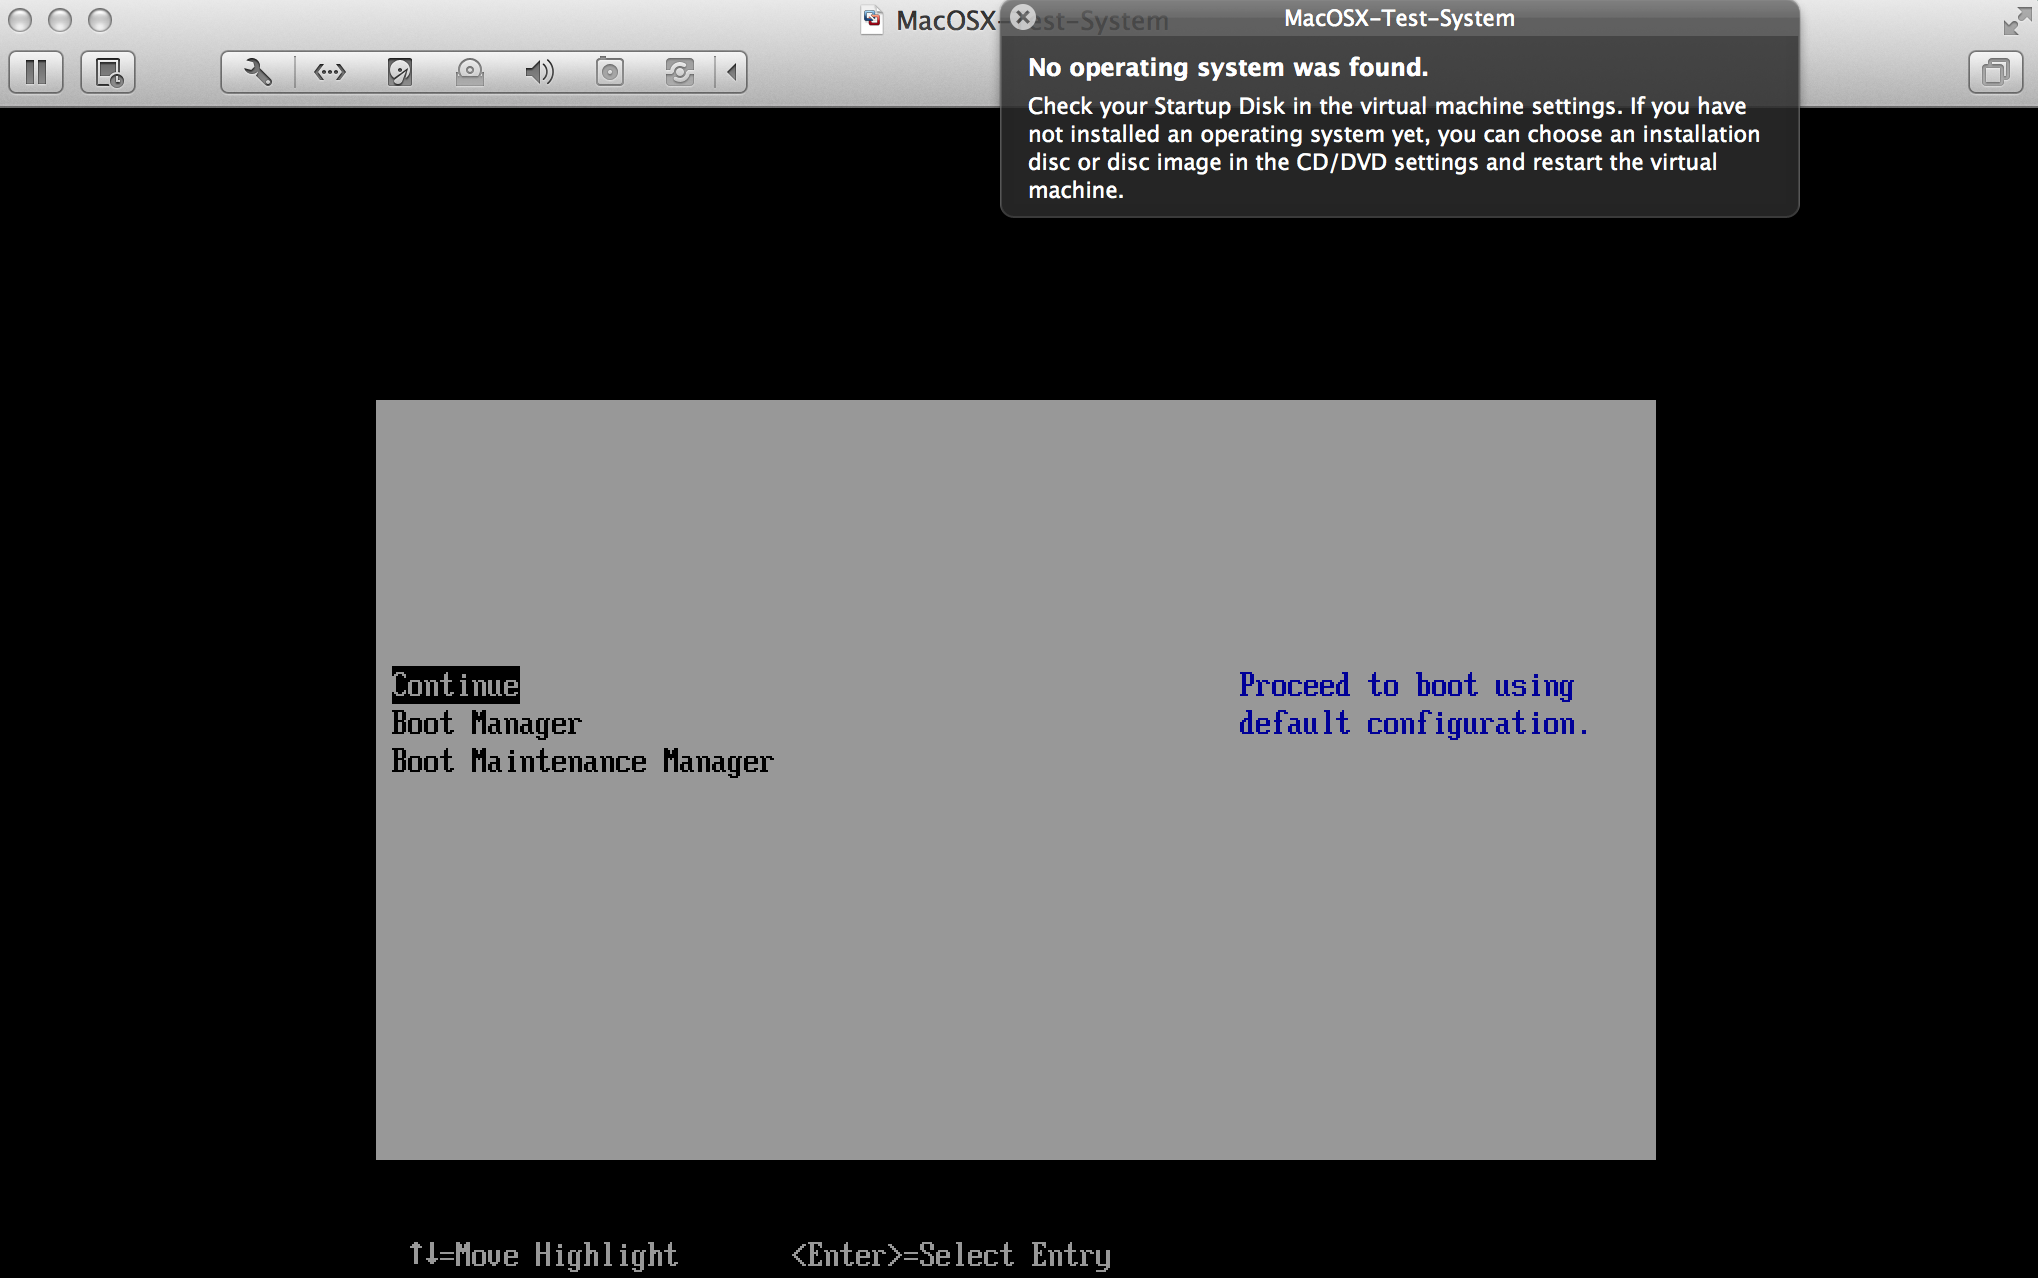 mac os 7 boot image for sheepshavcer